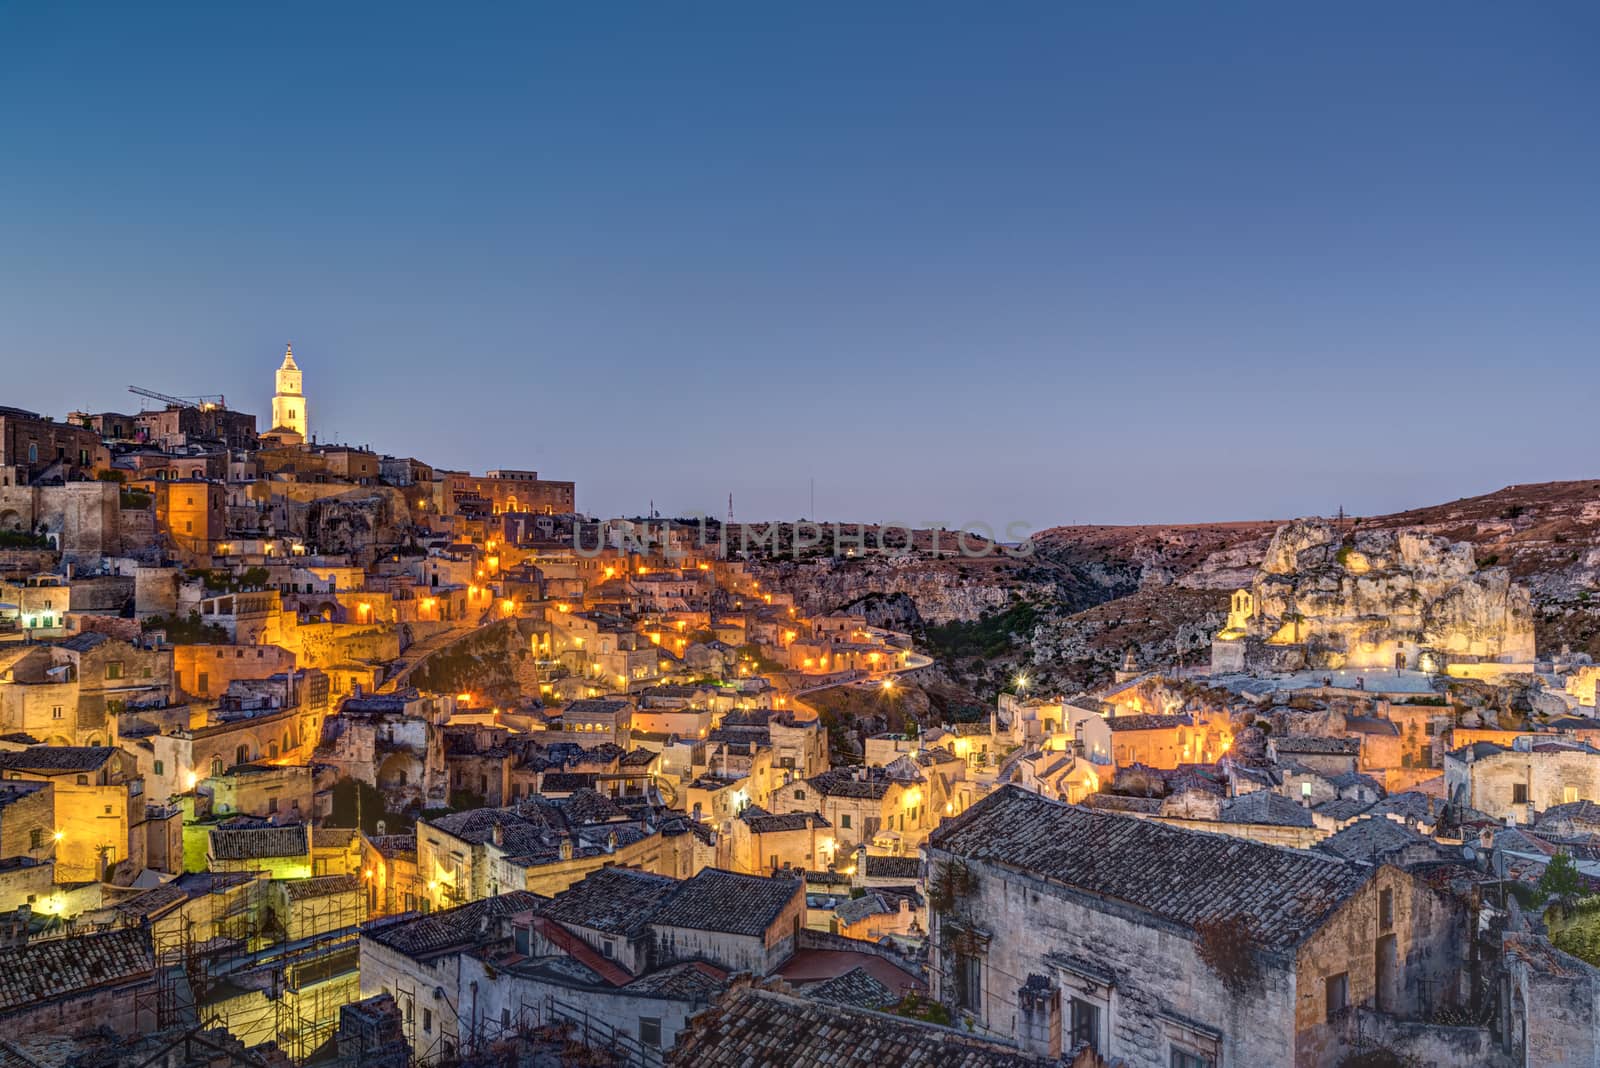 The old town of Matera in southern Italy at night